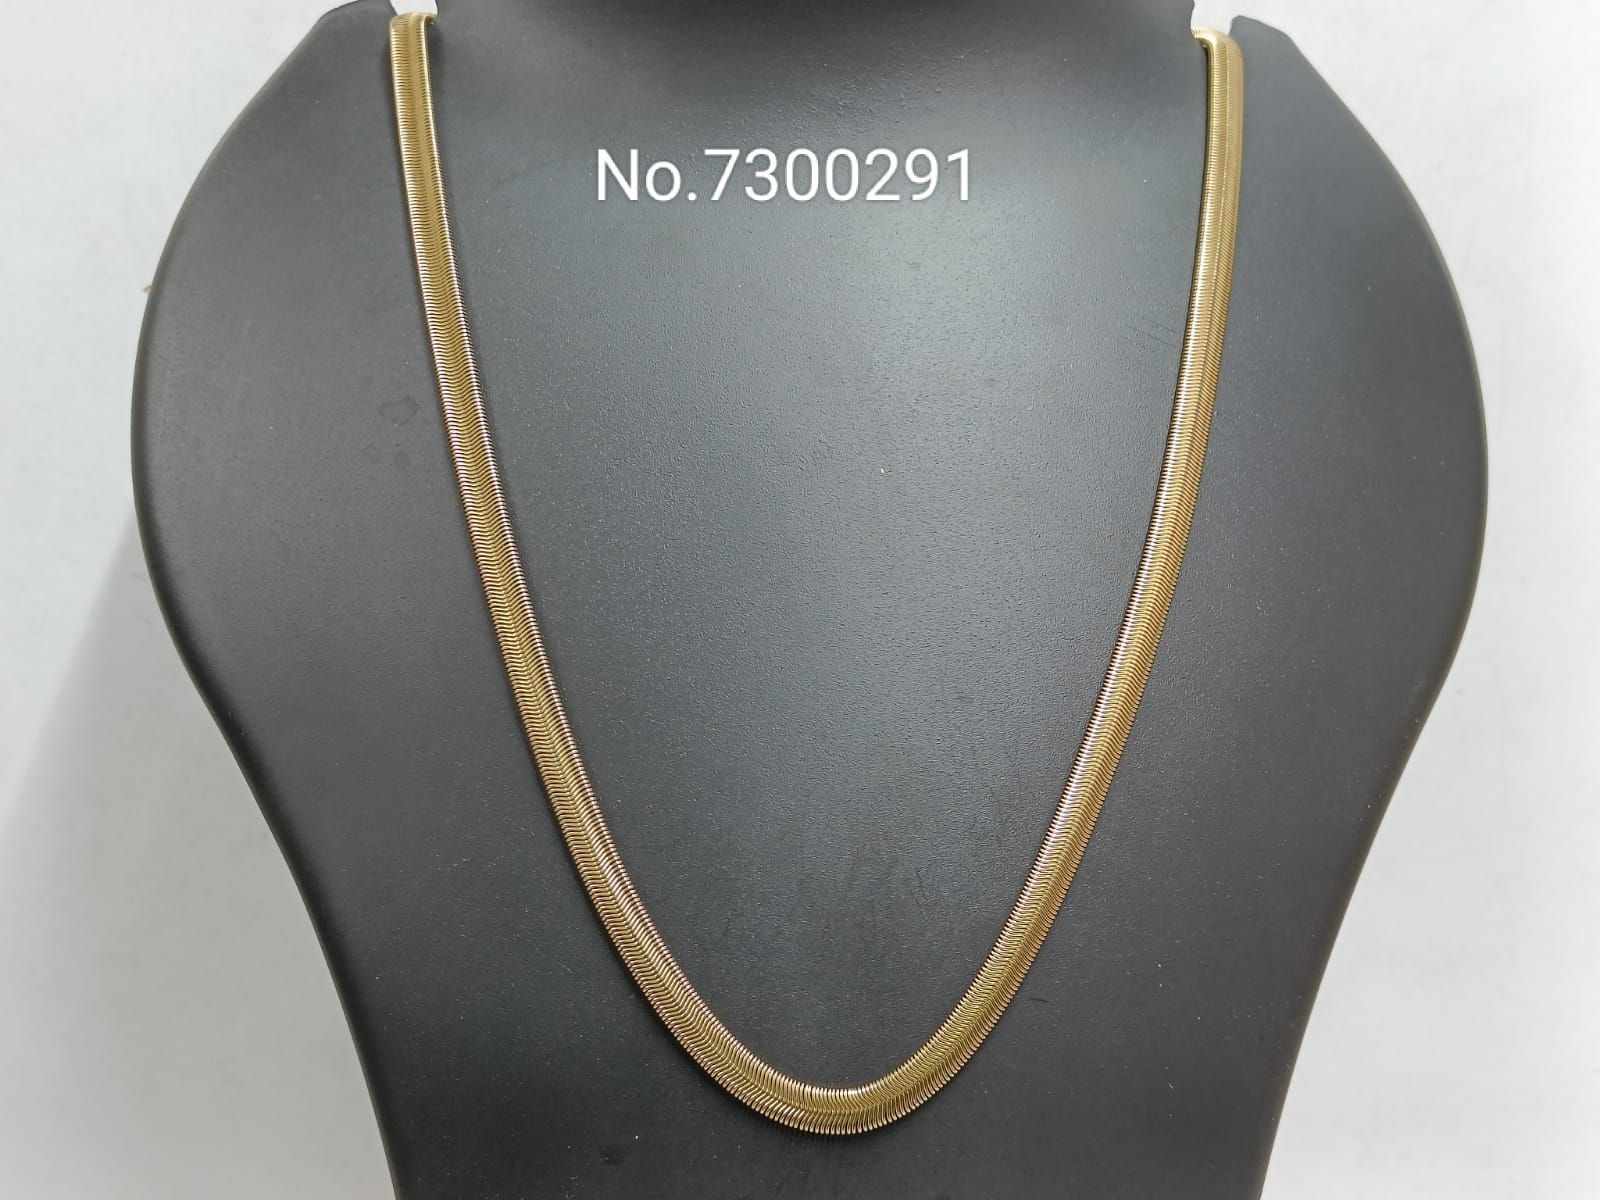 fcity.in - Golden Thin Neck Chain For Men Gold Plated Necklace Chain For Men